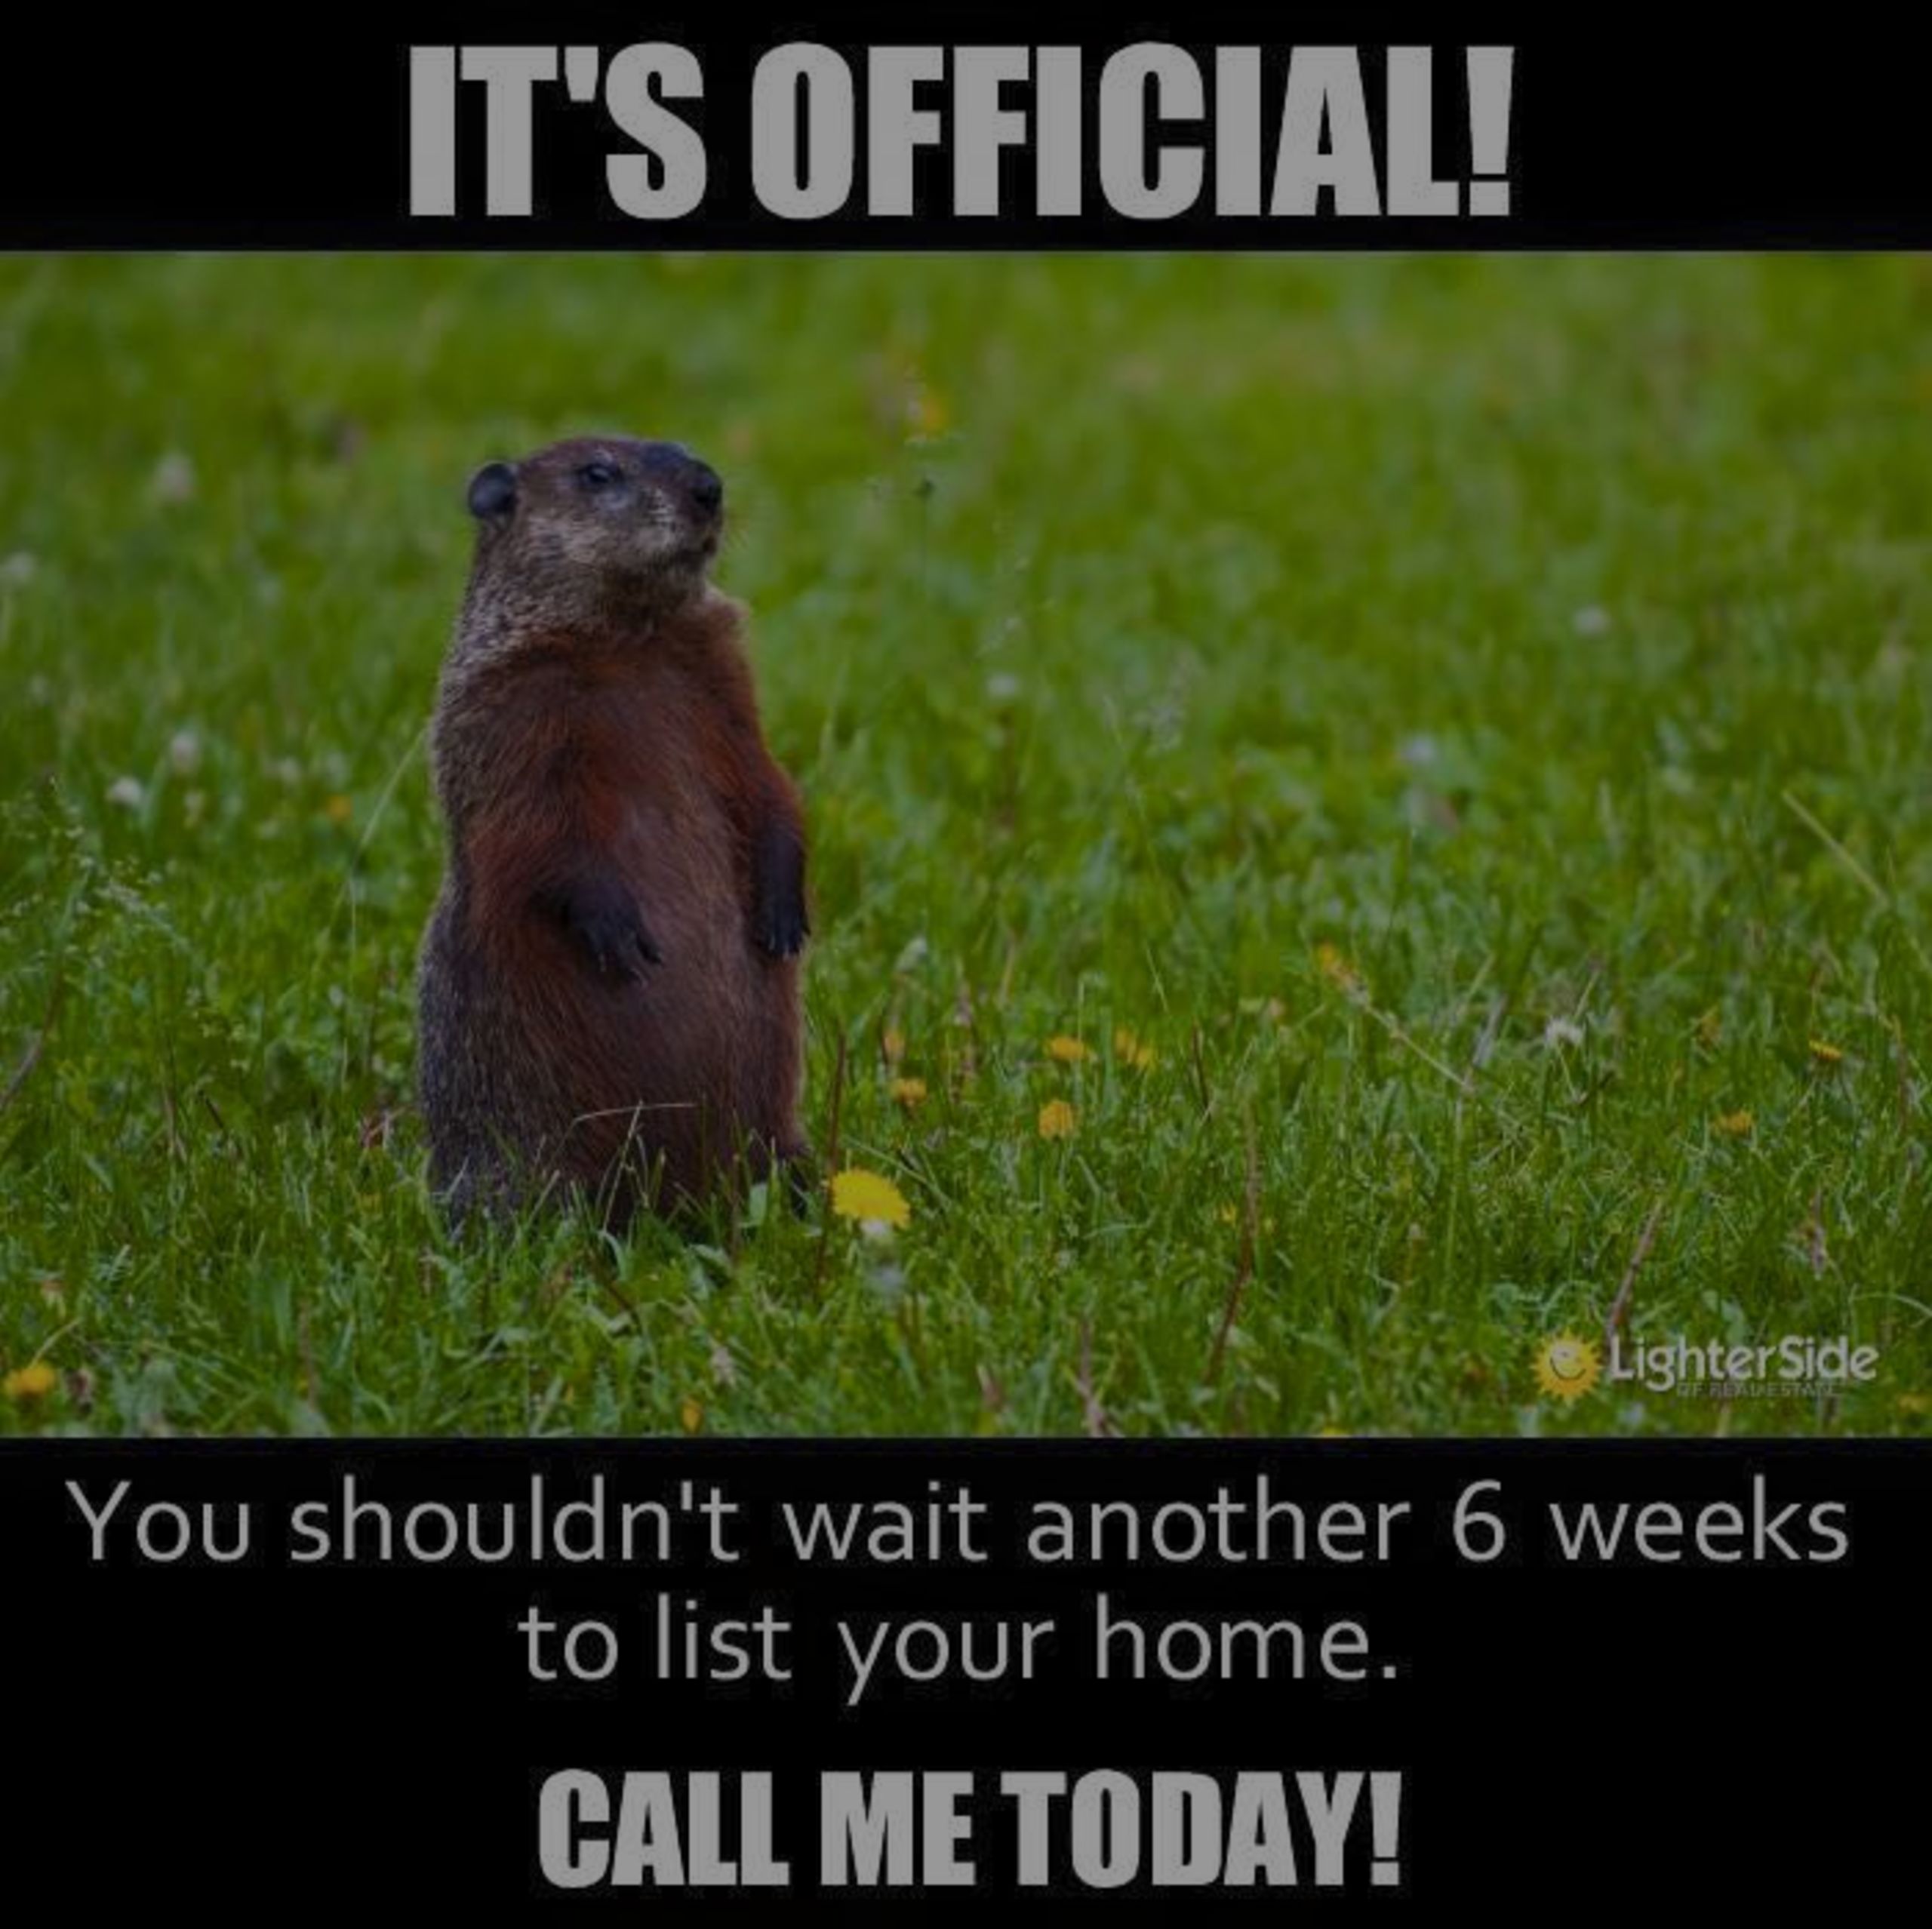 ​Do you believe whether a groundhog sees its shadow or not is a true indication of when Spring will come?